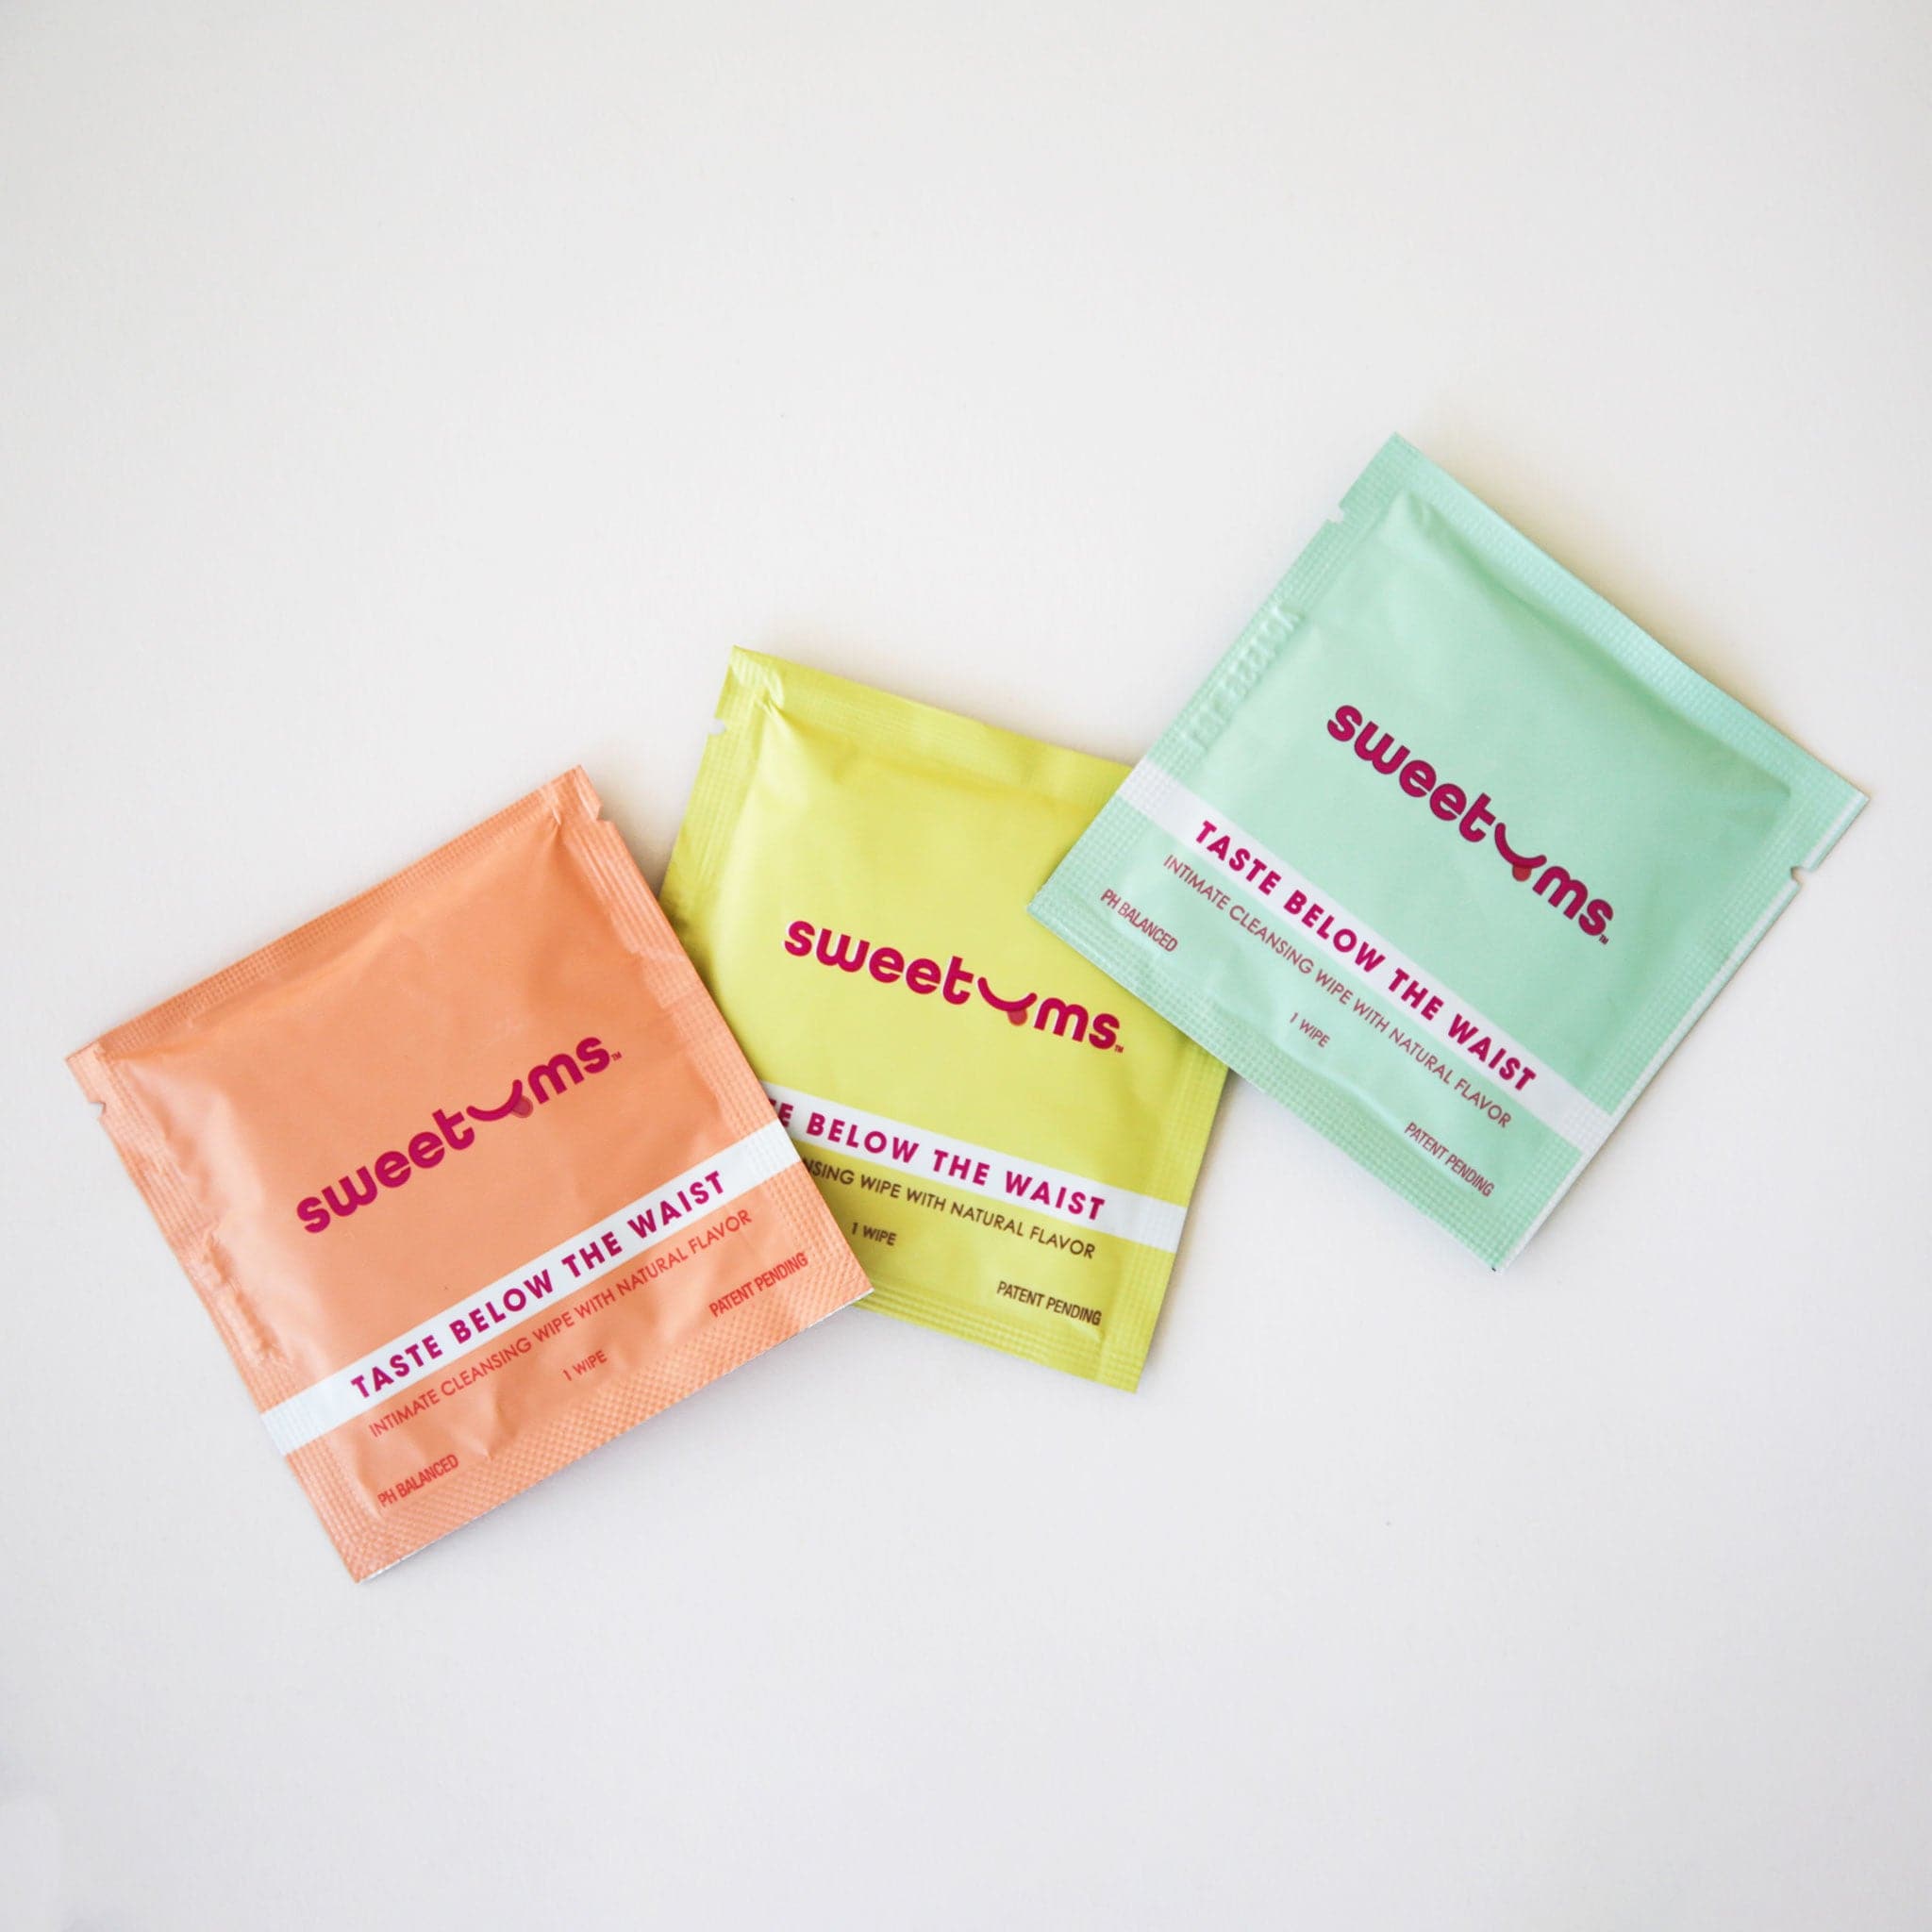 Individual packets of intimate cleaning wipes. Each scent has a different color packaging and this pina colada flavor is yellow.